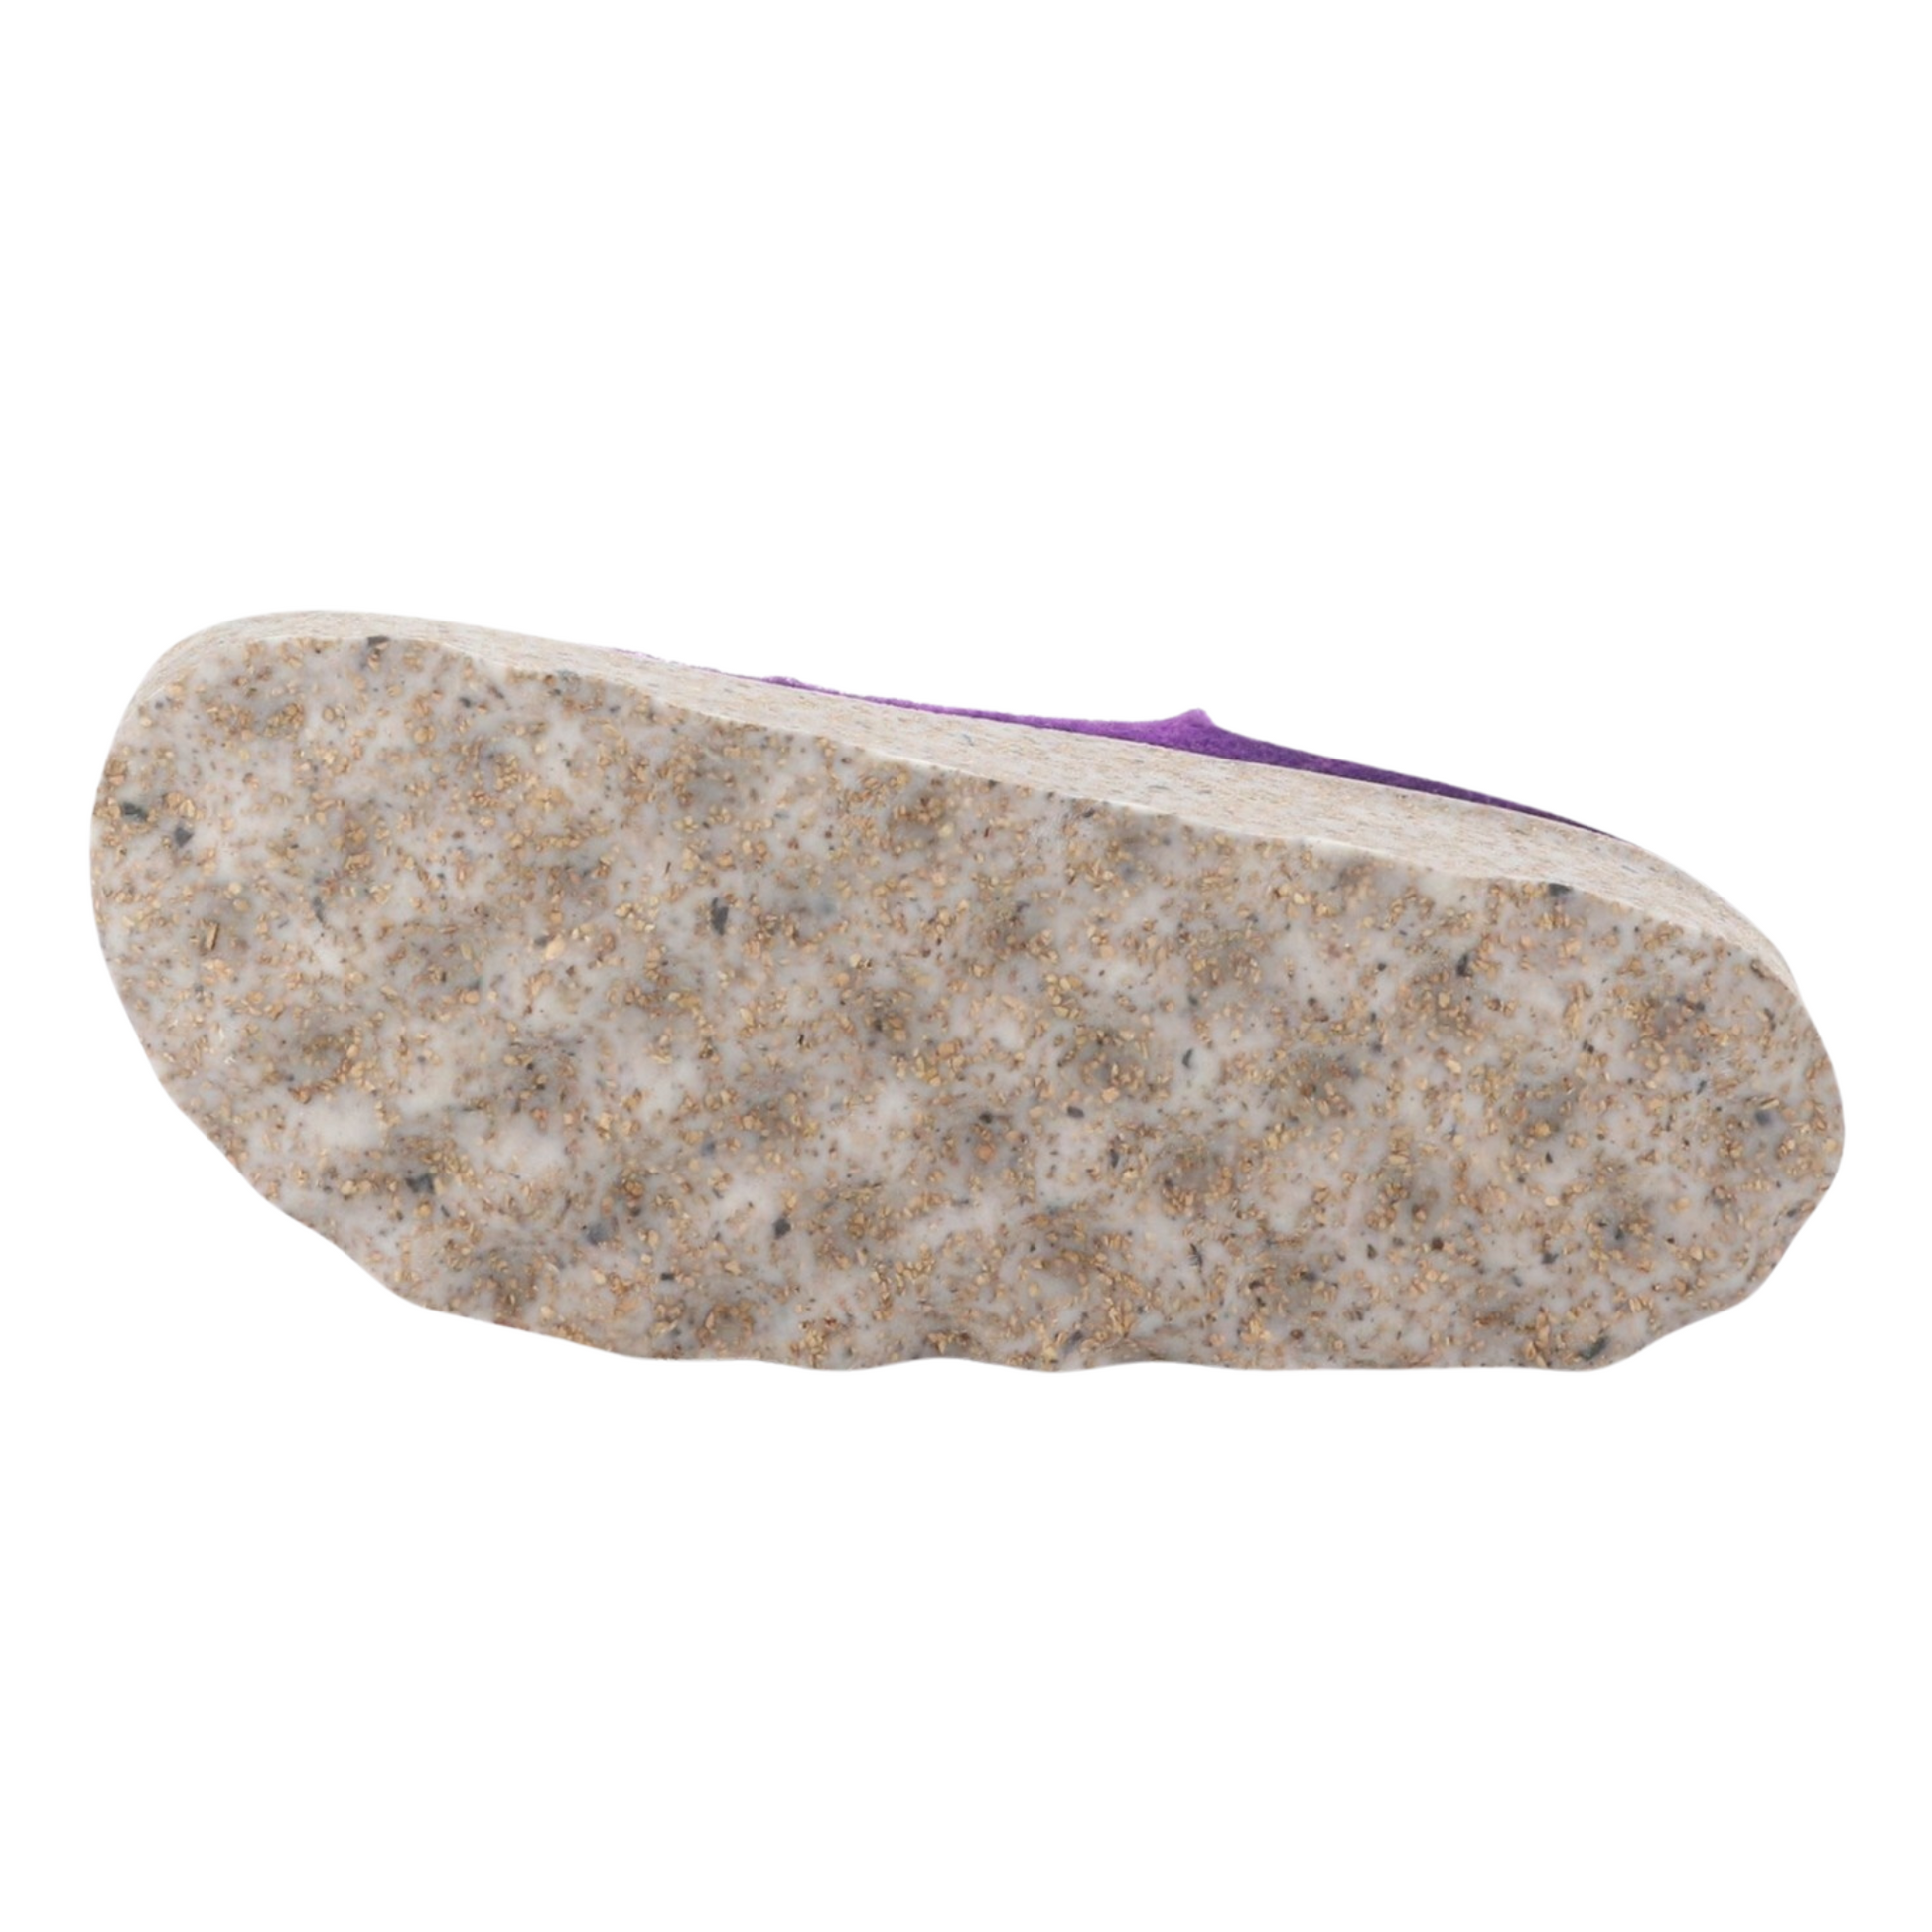 The bottom of a purple shoe is pictured depicting the waffle texture of the speckled tread.